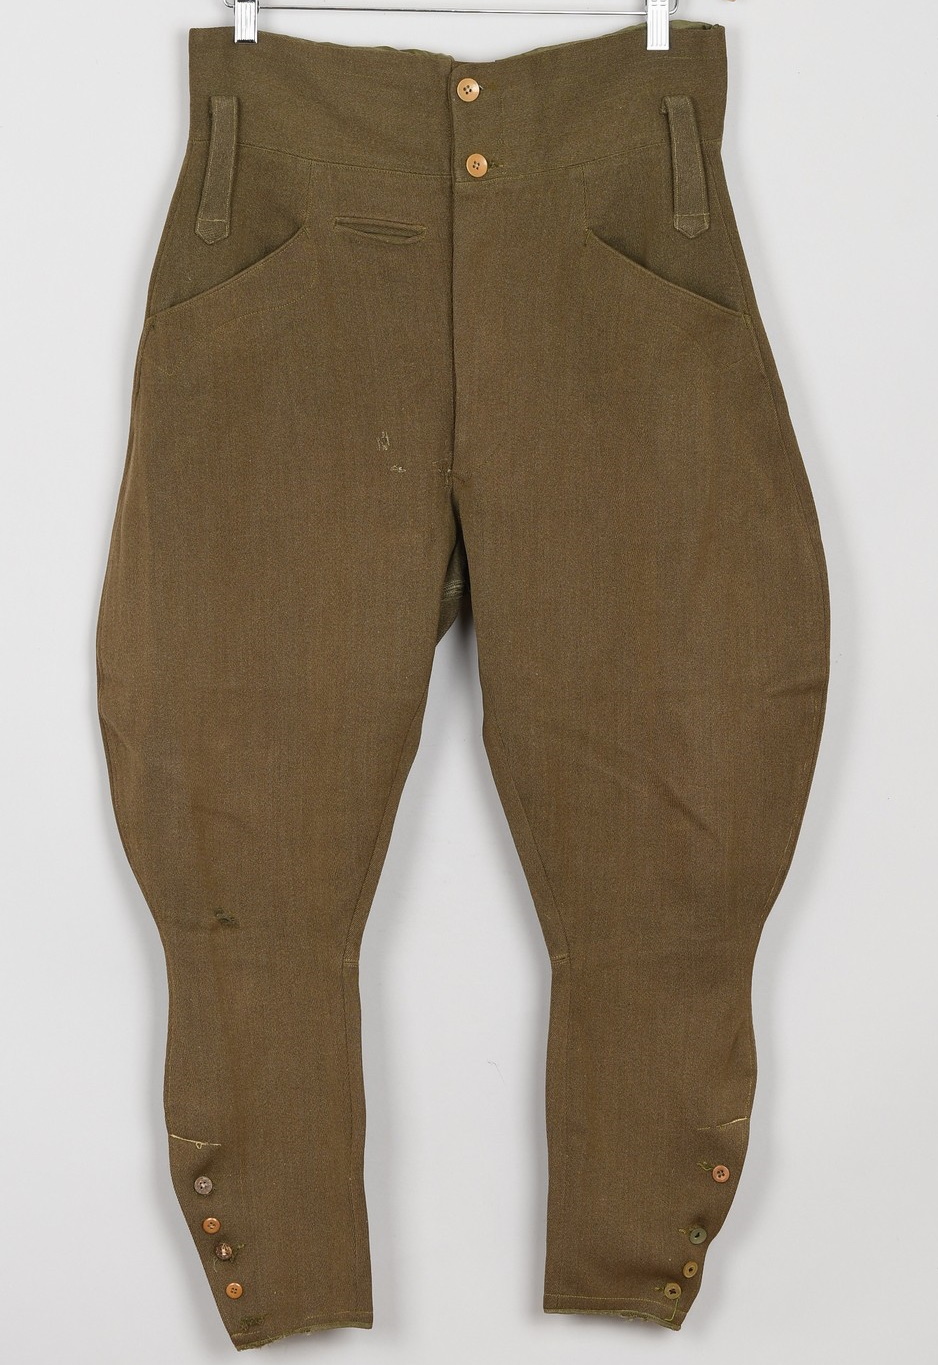 Japanese WW2 Army Officer's Trousers in Good Used Condition